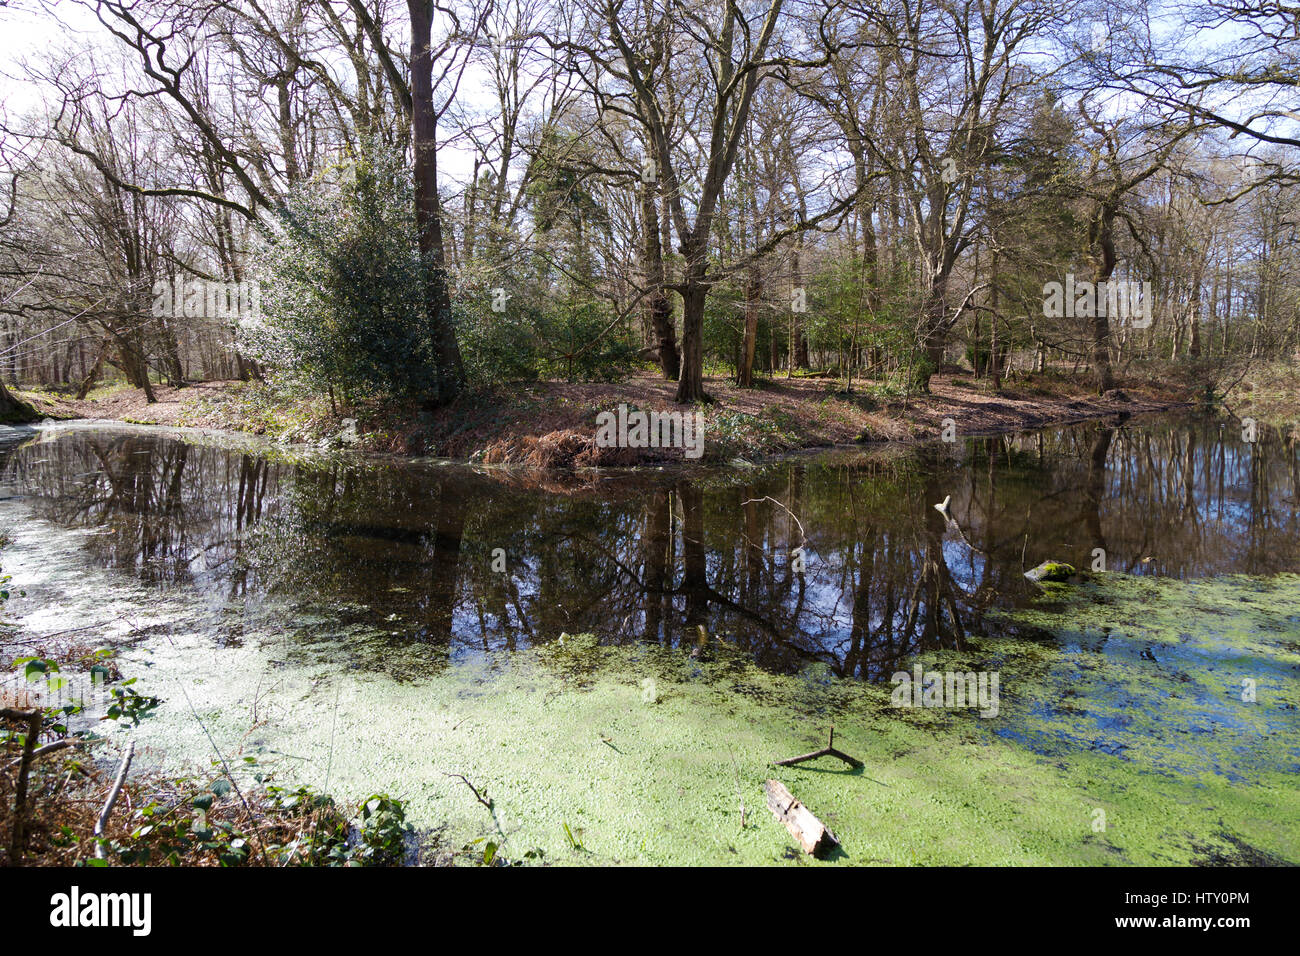 Trent Contry Park : Camelot Moat surrounding a small island. Stock Photo